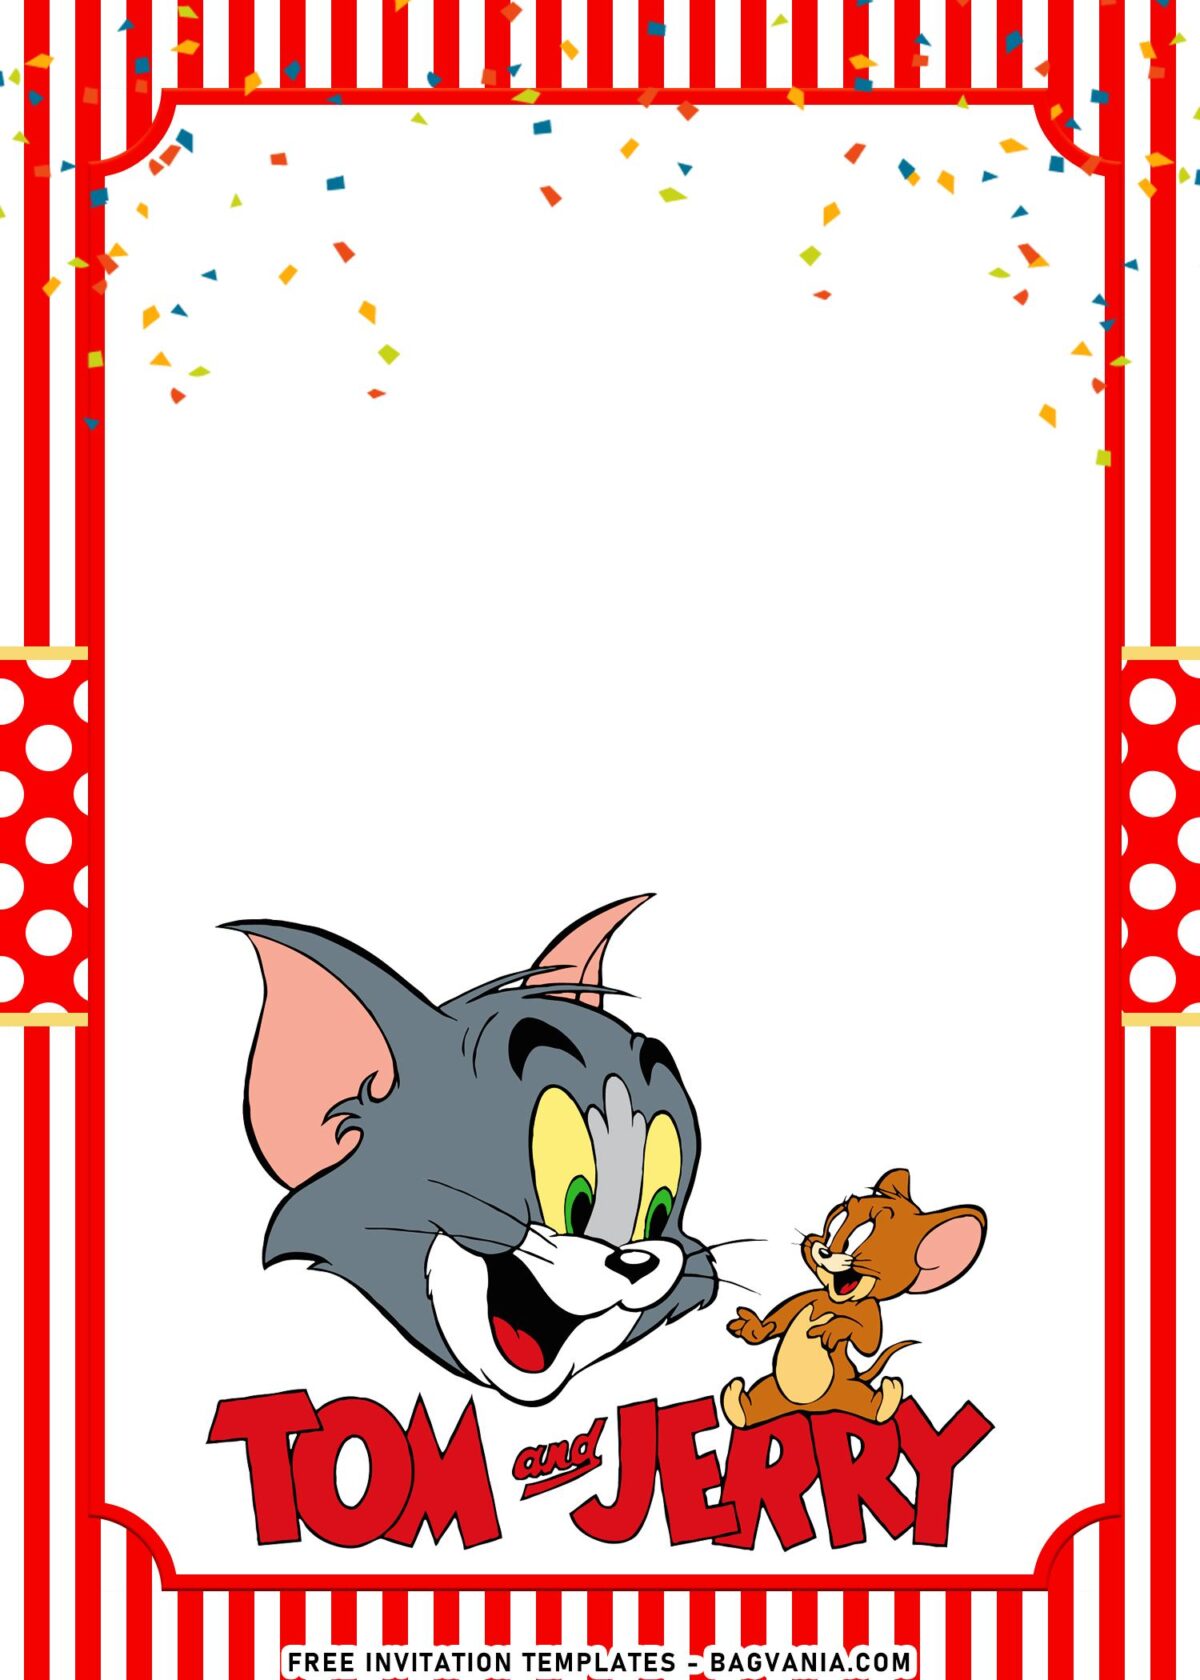 10+ Cartoon Tom And Jerry Birthday Invitation Templates with Tom and Jerry's laughing